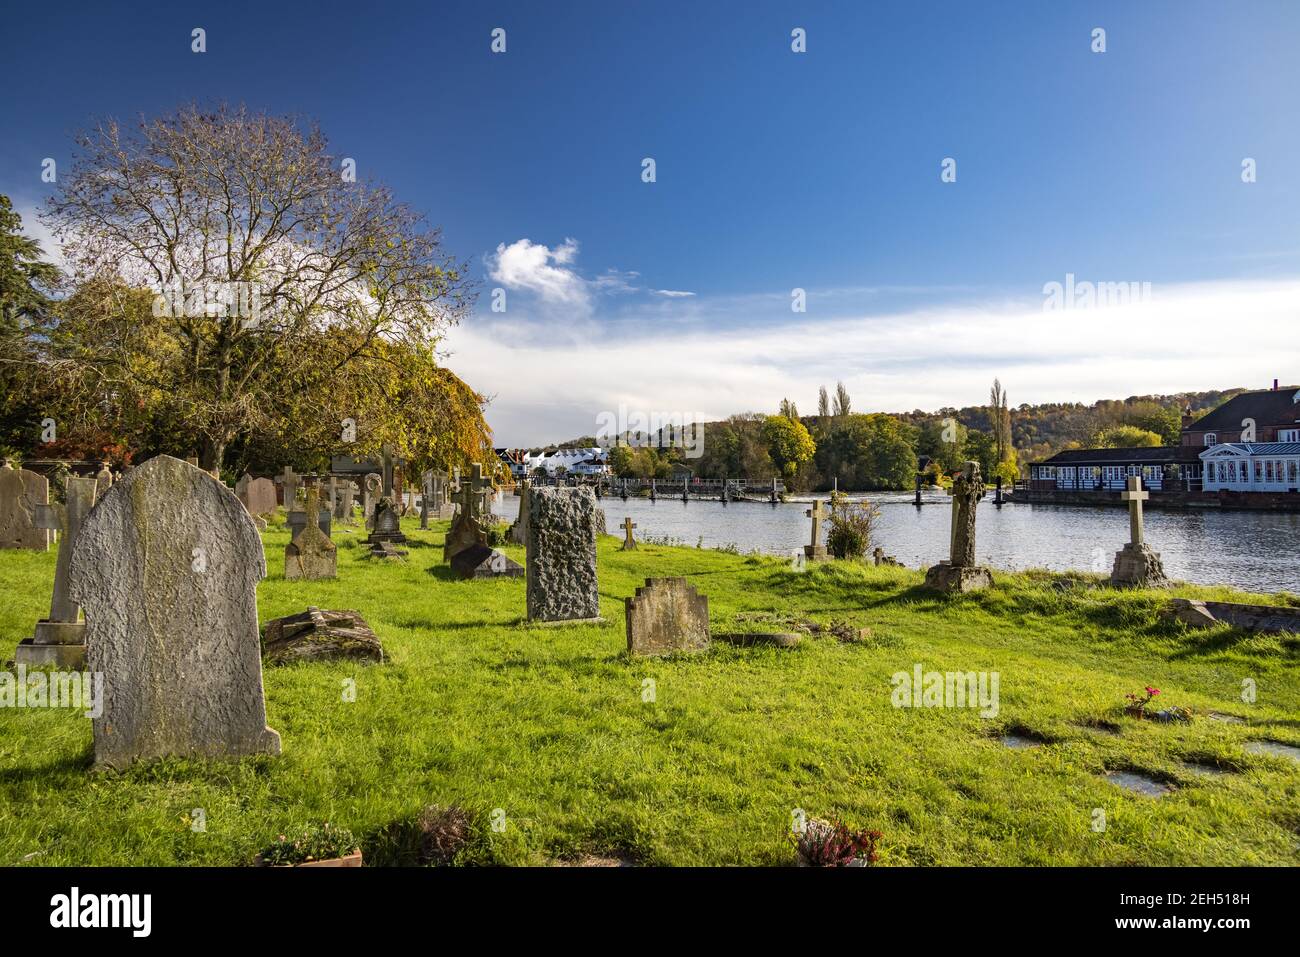 Graveyard in Marlow along the River Thames, England Stock Photo